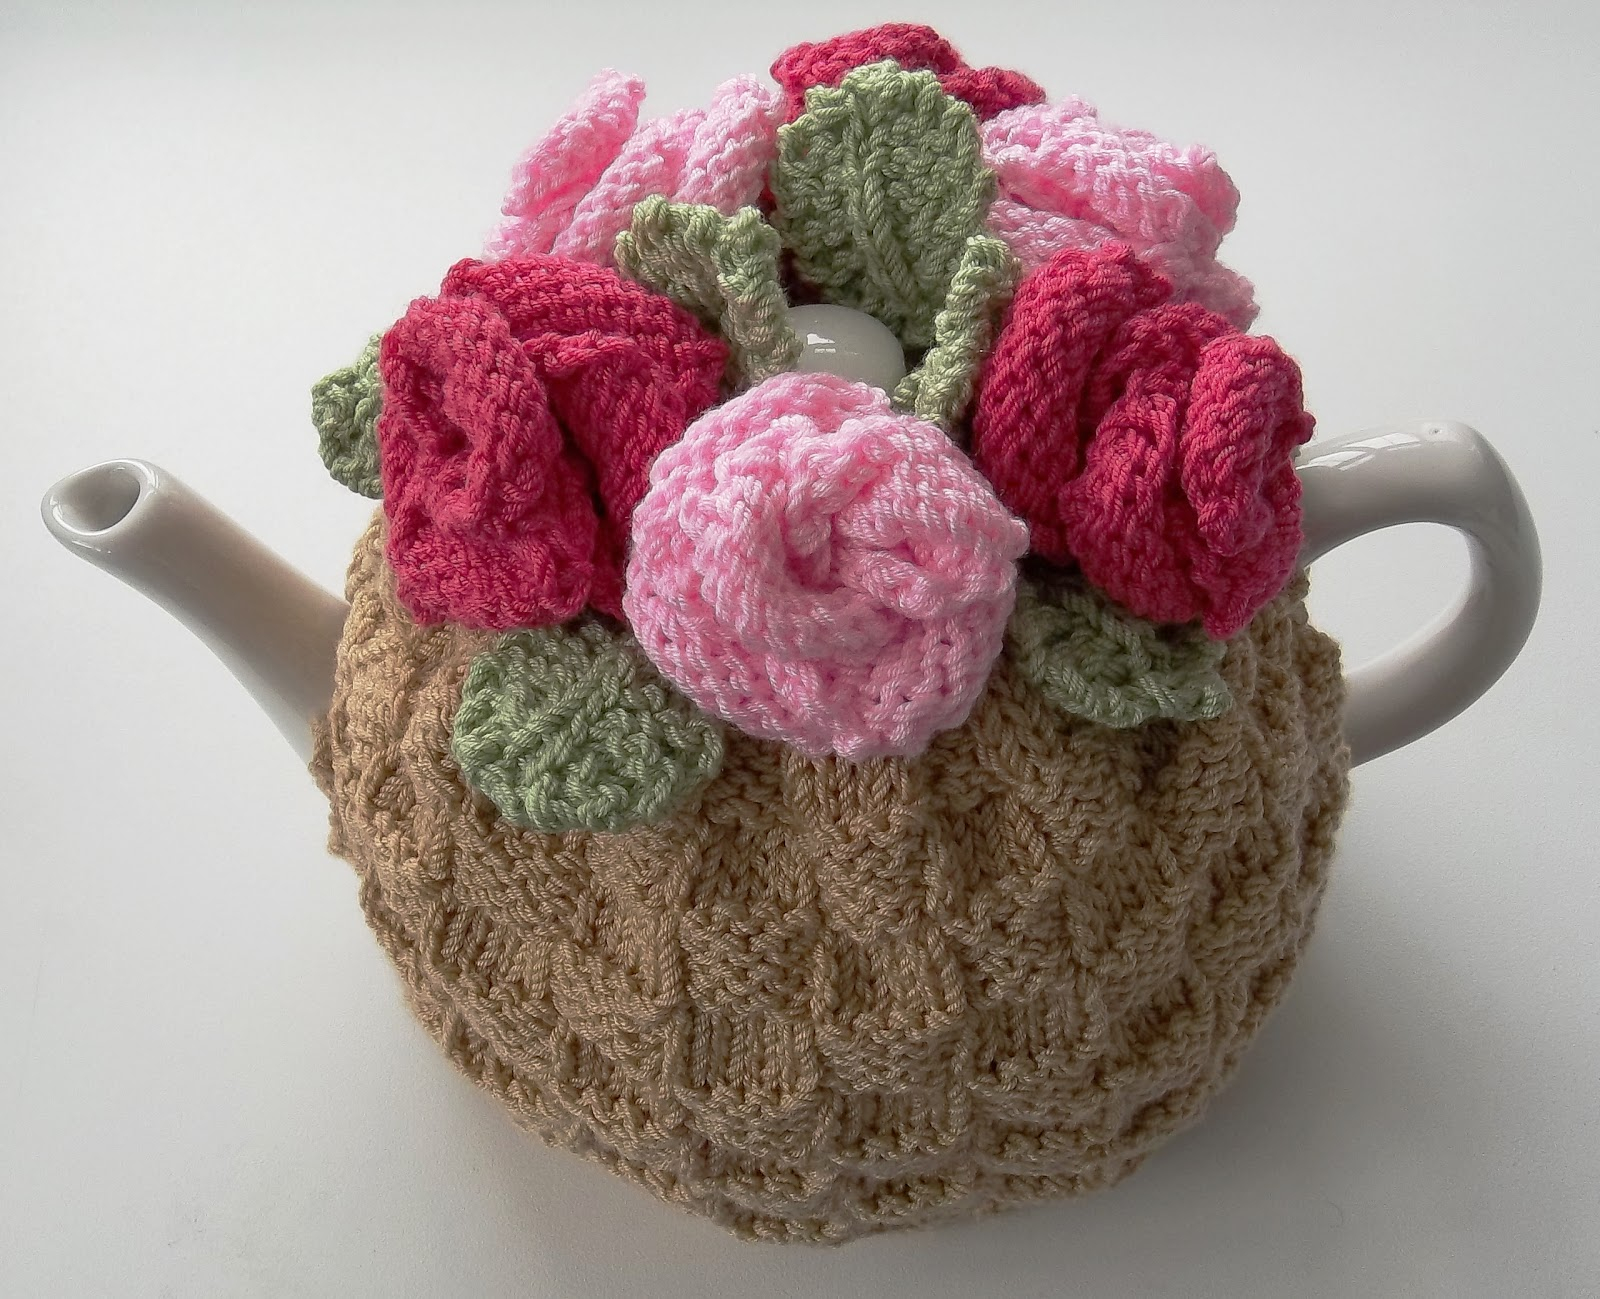 Tea Cosy Patterns To Knit The Tea Rose Tea Cosy Hand Knitting Pattern